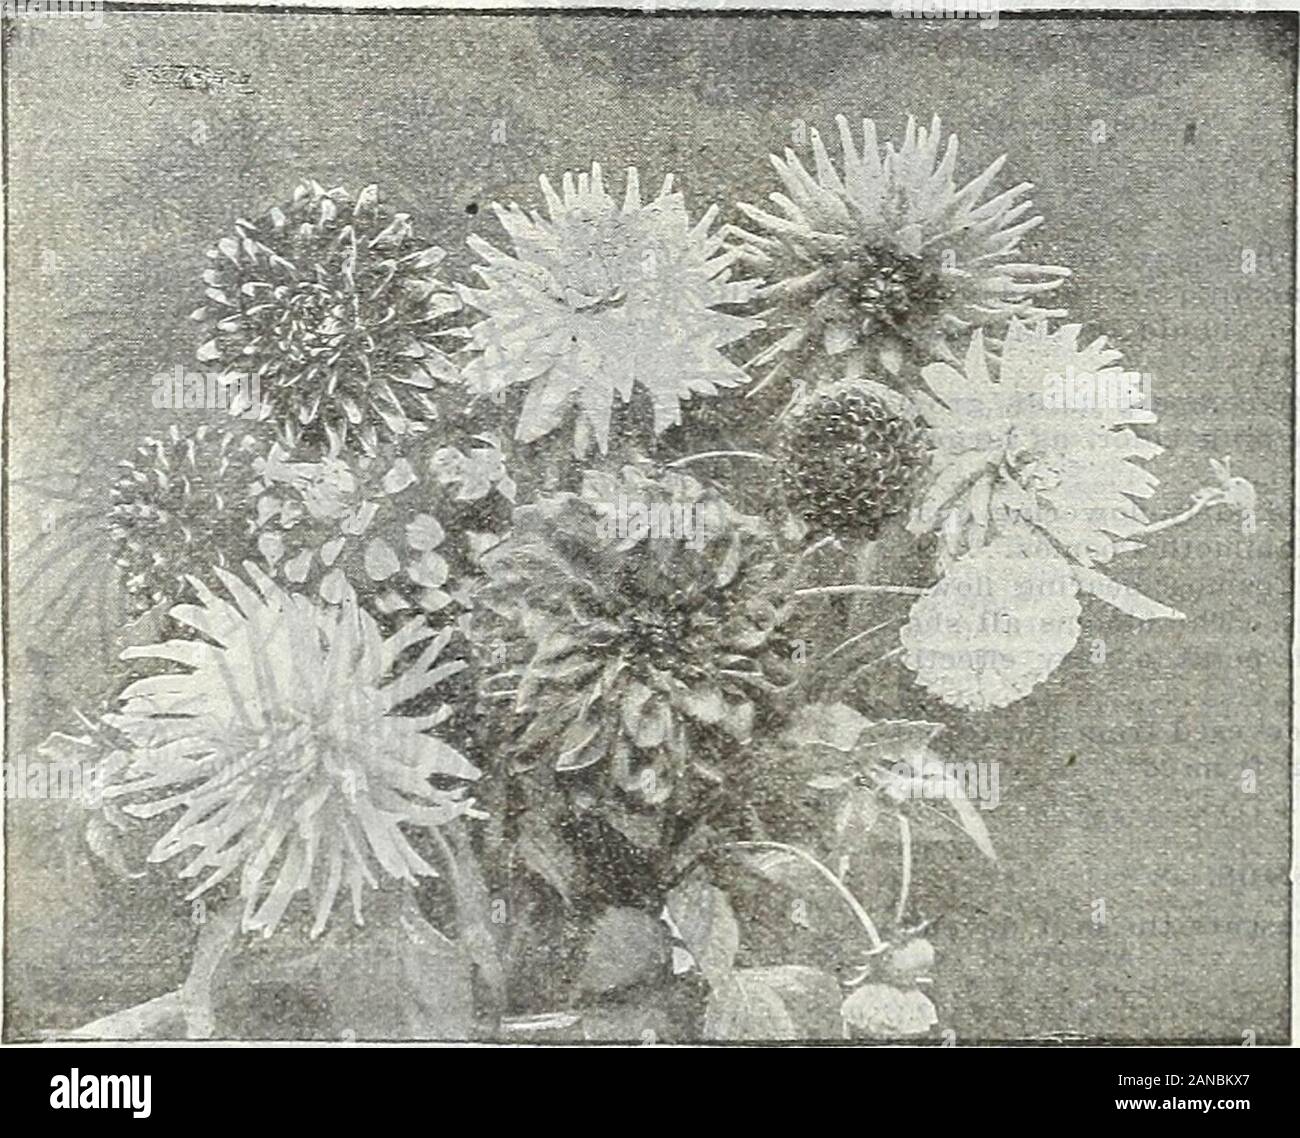 Farm and garden annual, spring 1906 . DAISY THE BBID1 DOUBLE DAISIES. Mollis Perennis. fl. pi One of the most charming of our early spring flowers. They are very easily raised from seed, and can be 5g# had in bloom the first season. Require a slig-ht protection during the winter. H. H. P?# JF R Pkt- The Bride—The best of the Double White Daisies, extra large and very double flowers, borne on long stiff stems. Very early and free flowering 10 Longfellow—Flowers large, dark rose.... 5 Snowball—Large, very double, pure white 5 Double White . .- 5 Double Red 5 s Double Mixed 5 DATURA. Ornamental, Stock Photo